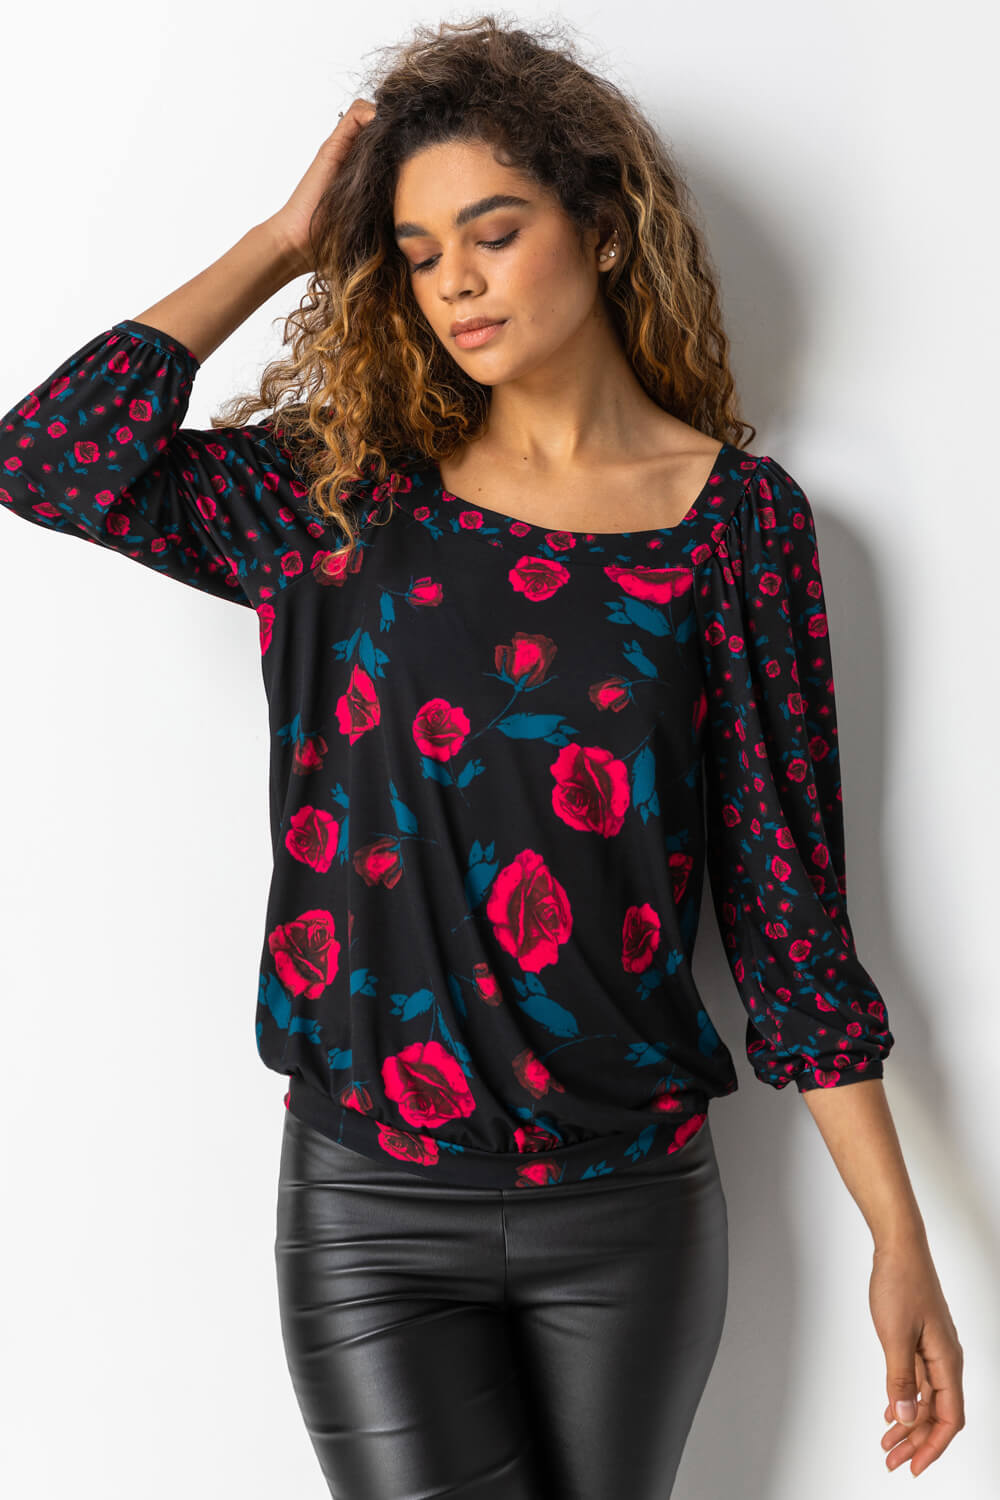 PINK Contrast Floral Print Square Neck Top, Image 4 of 5